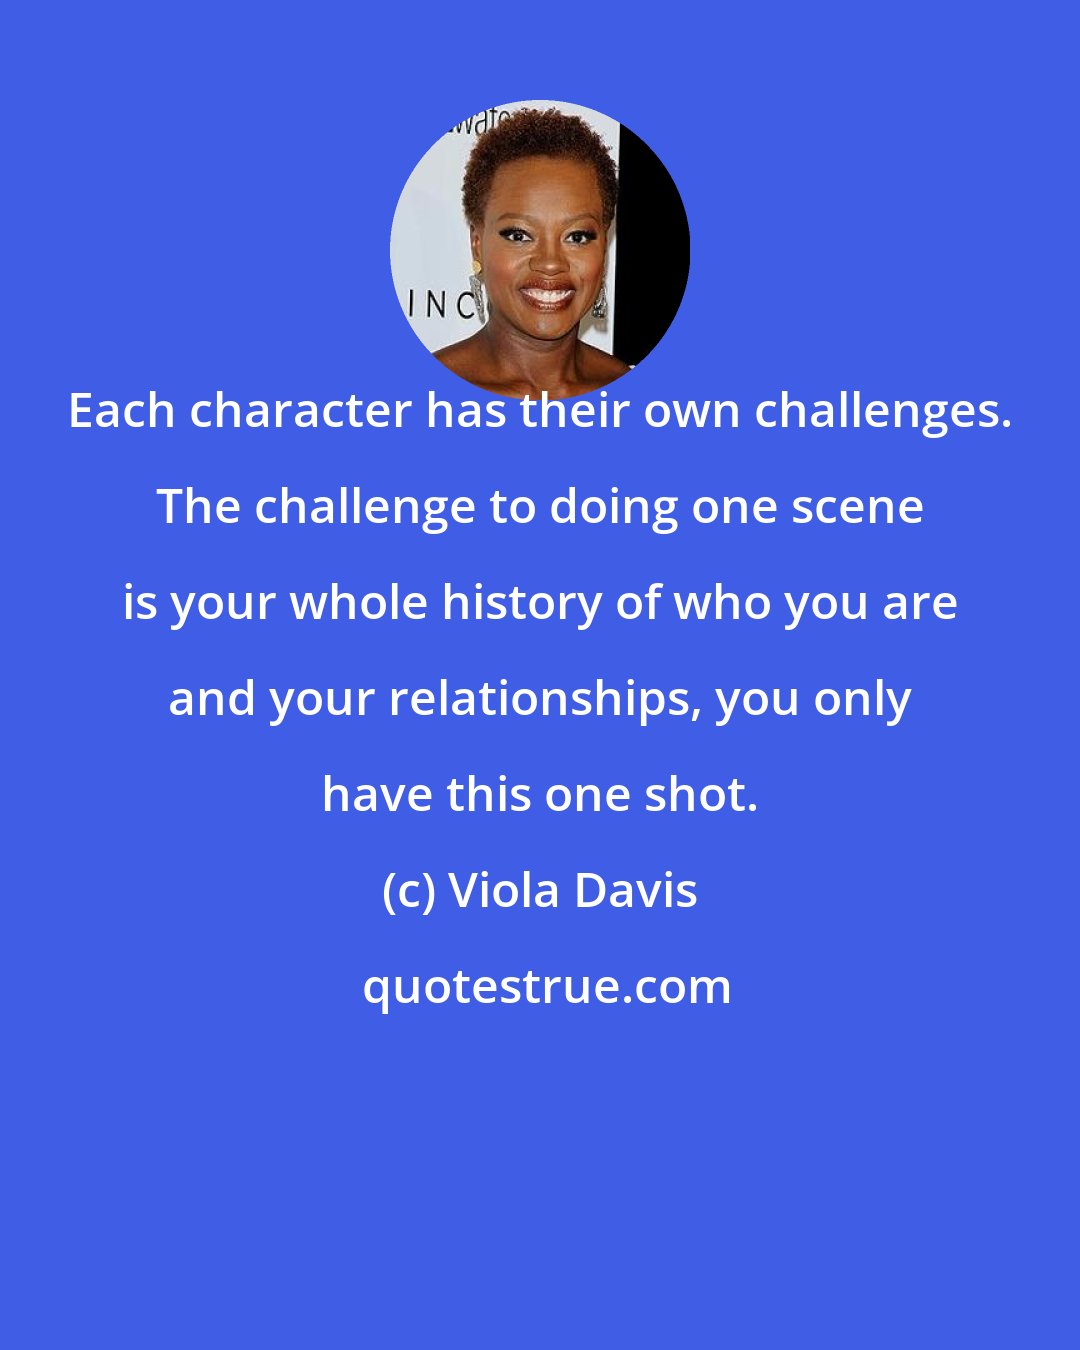 Viola Davis: Each character has their own challenges. The challenge to doing one scene is your whole history of who you are and your relationships, you only have this one shot.